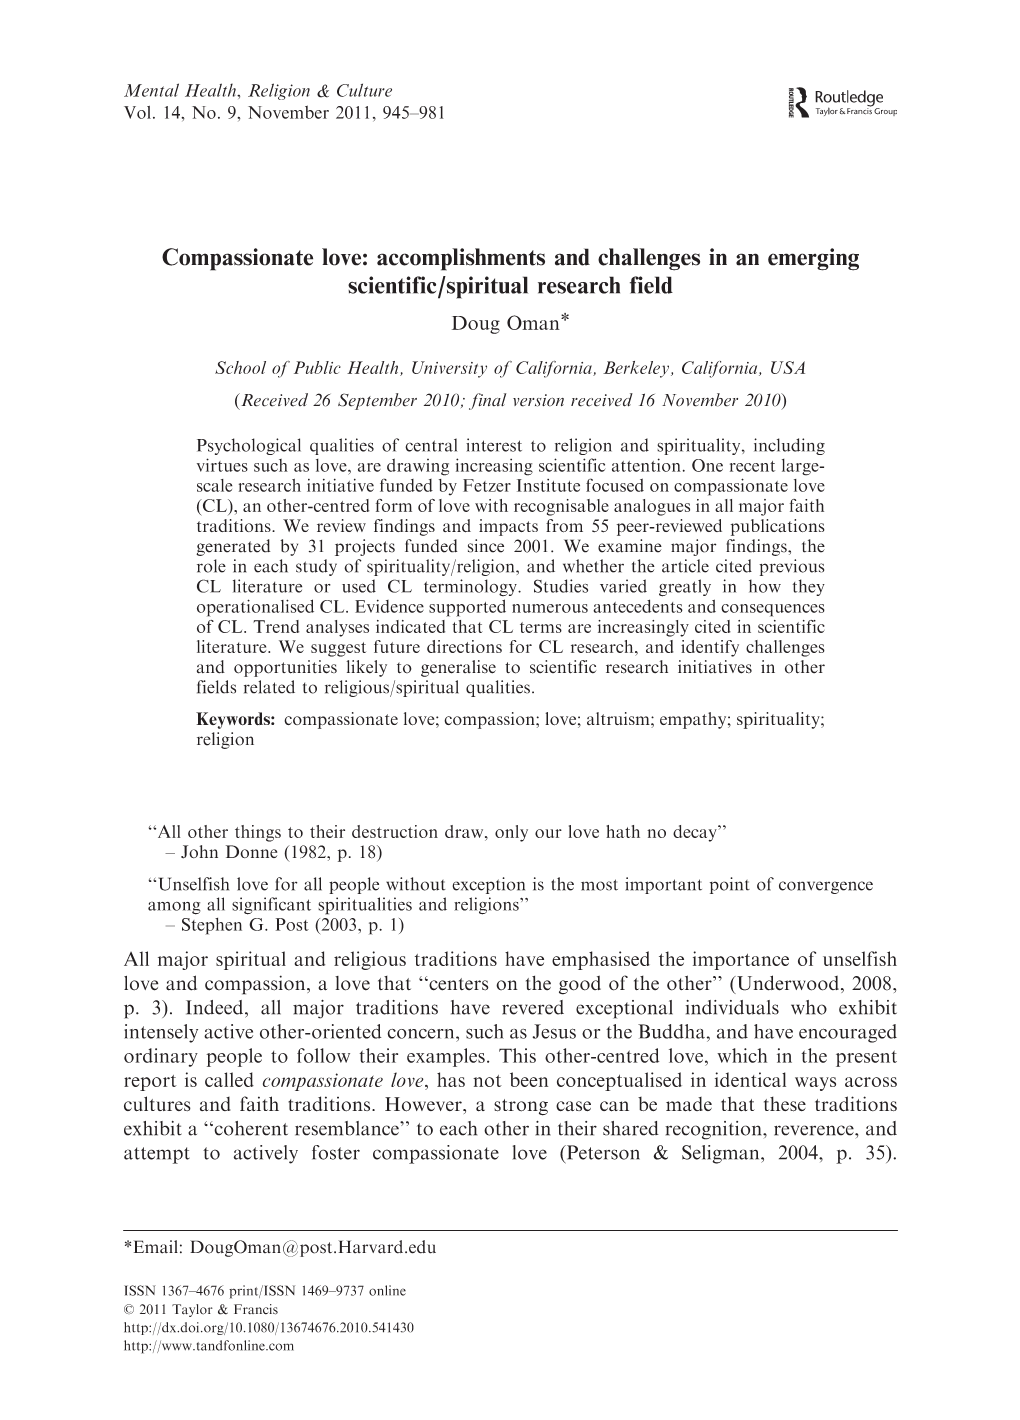 Compassionate Love: Accomplishments and Challenges in an Emerging Scientific/Spiritual Research Field Doug Oman*